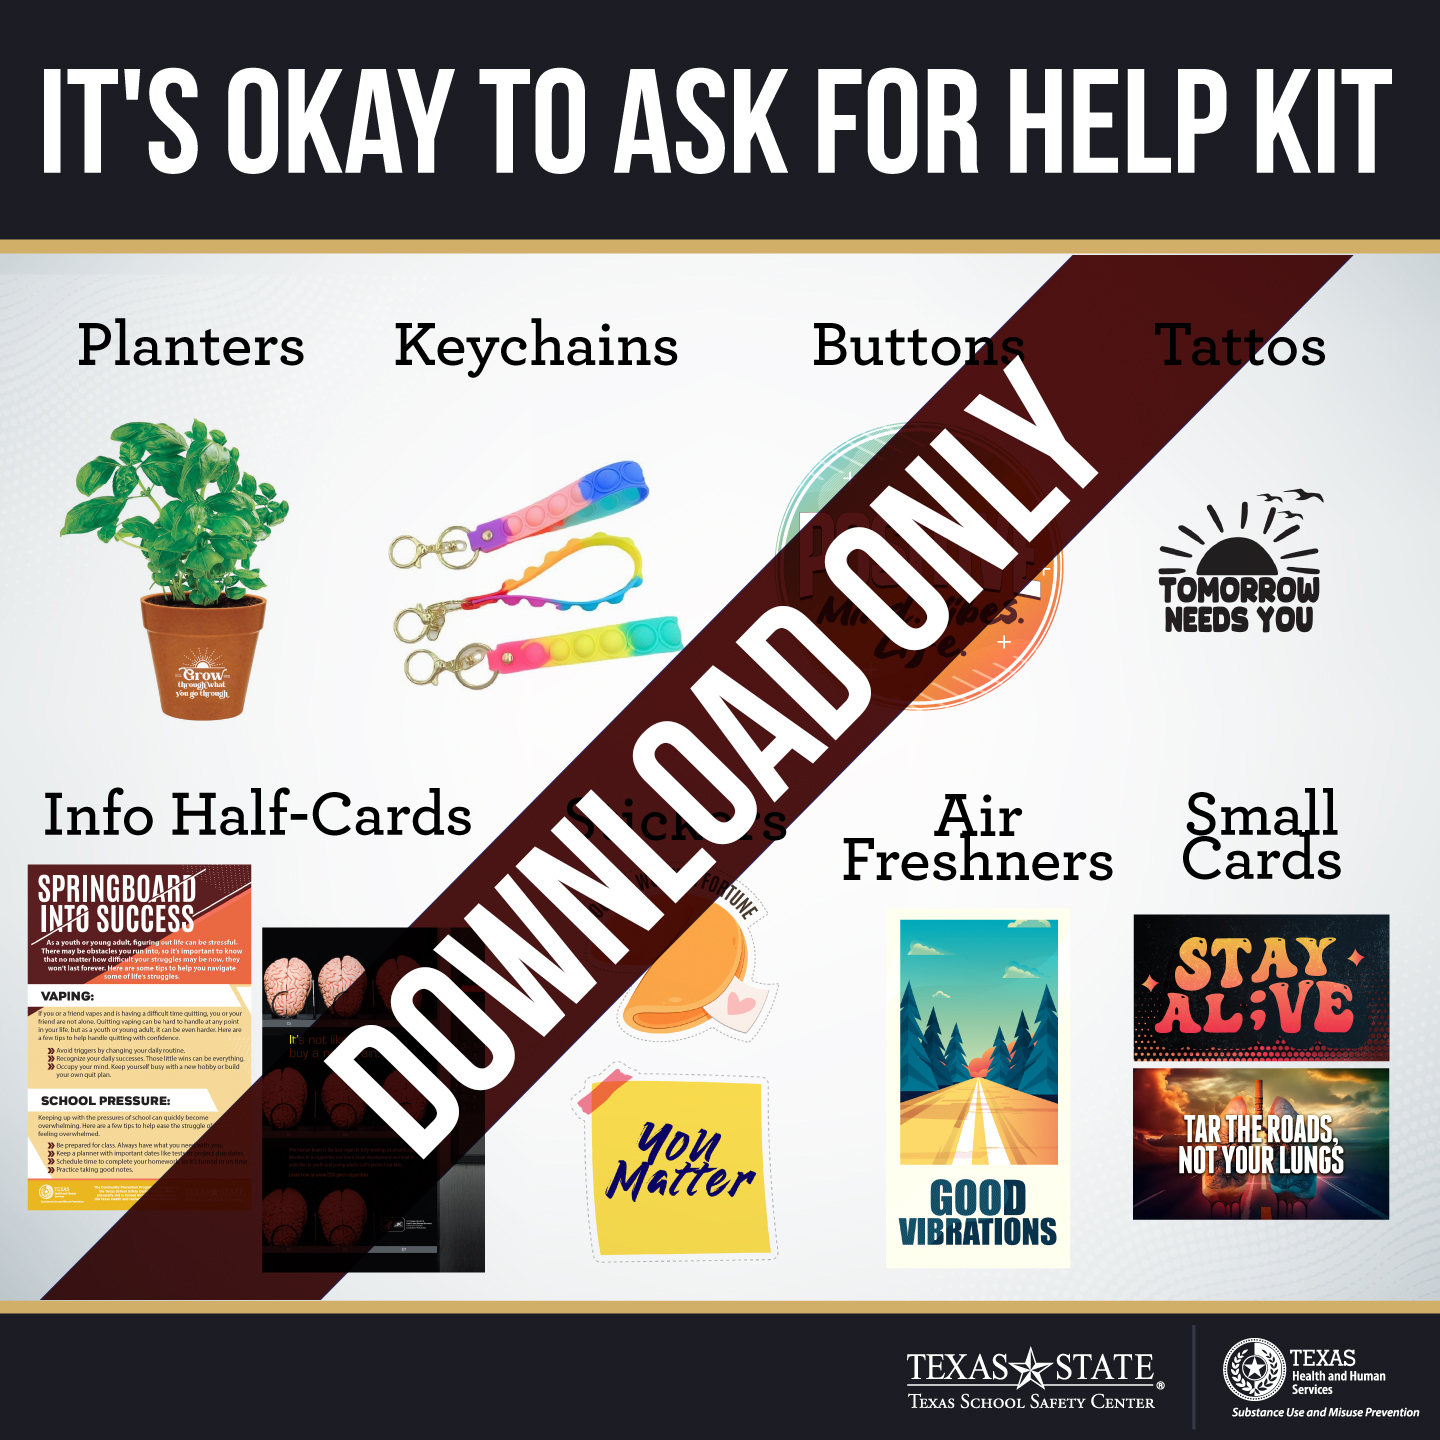 Its Okay to Ask for Help Download Kit